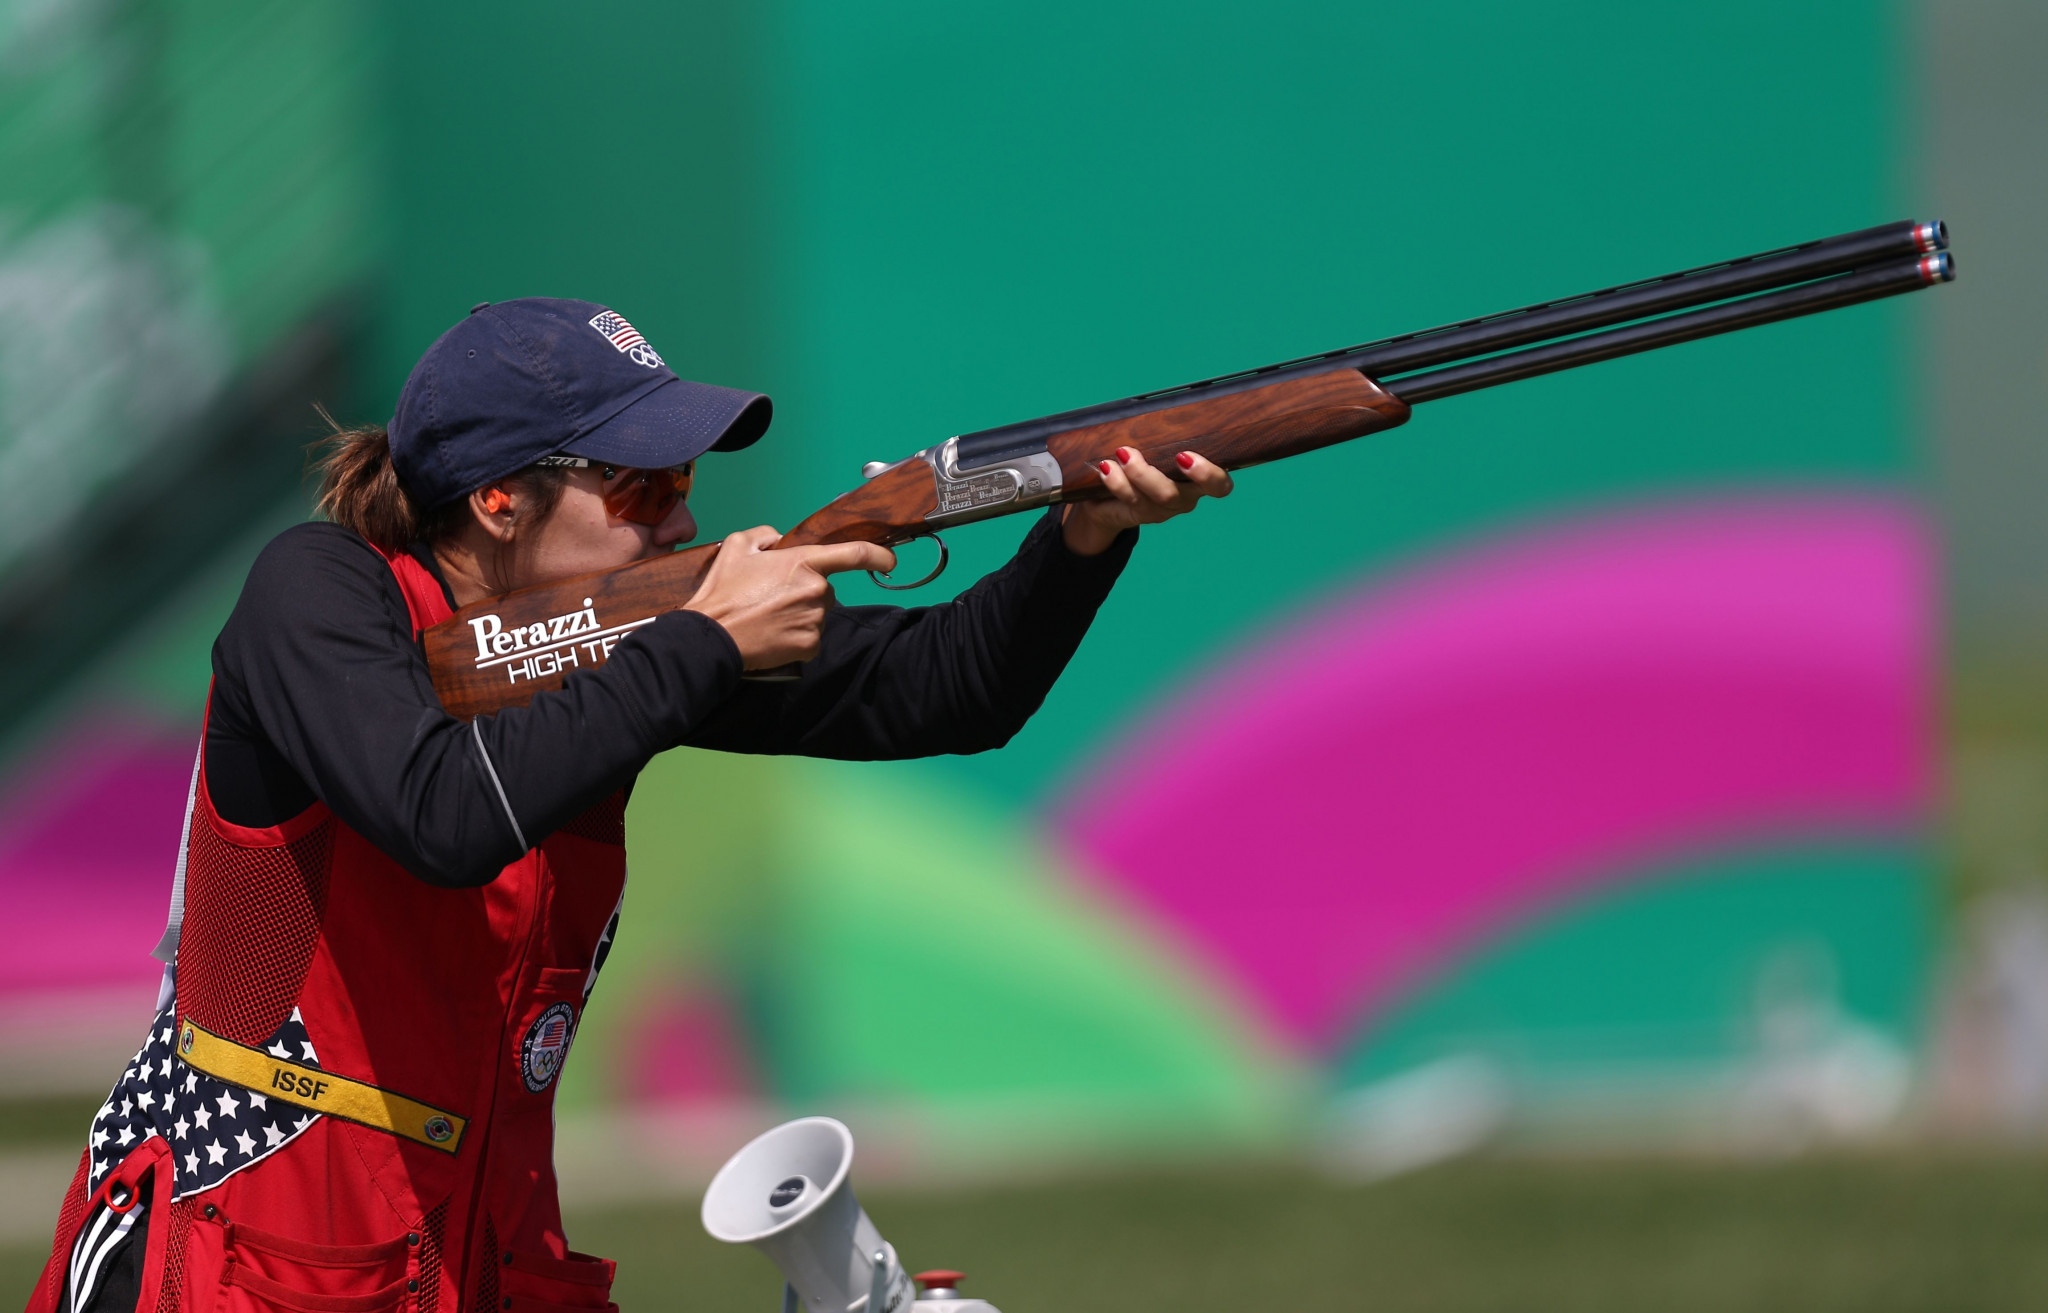 Dania Vizzi helped the United States beat Italy 6-0 in the women's team skeet final ©Getty Images